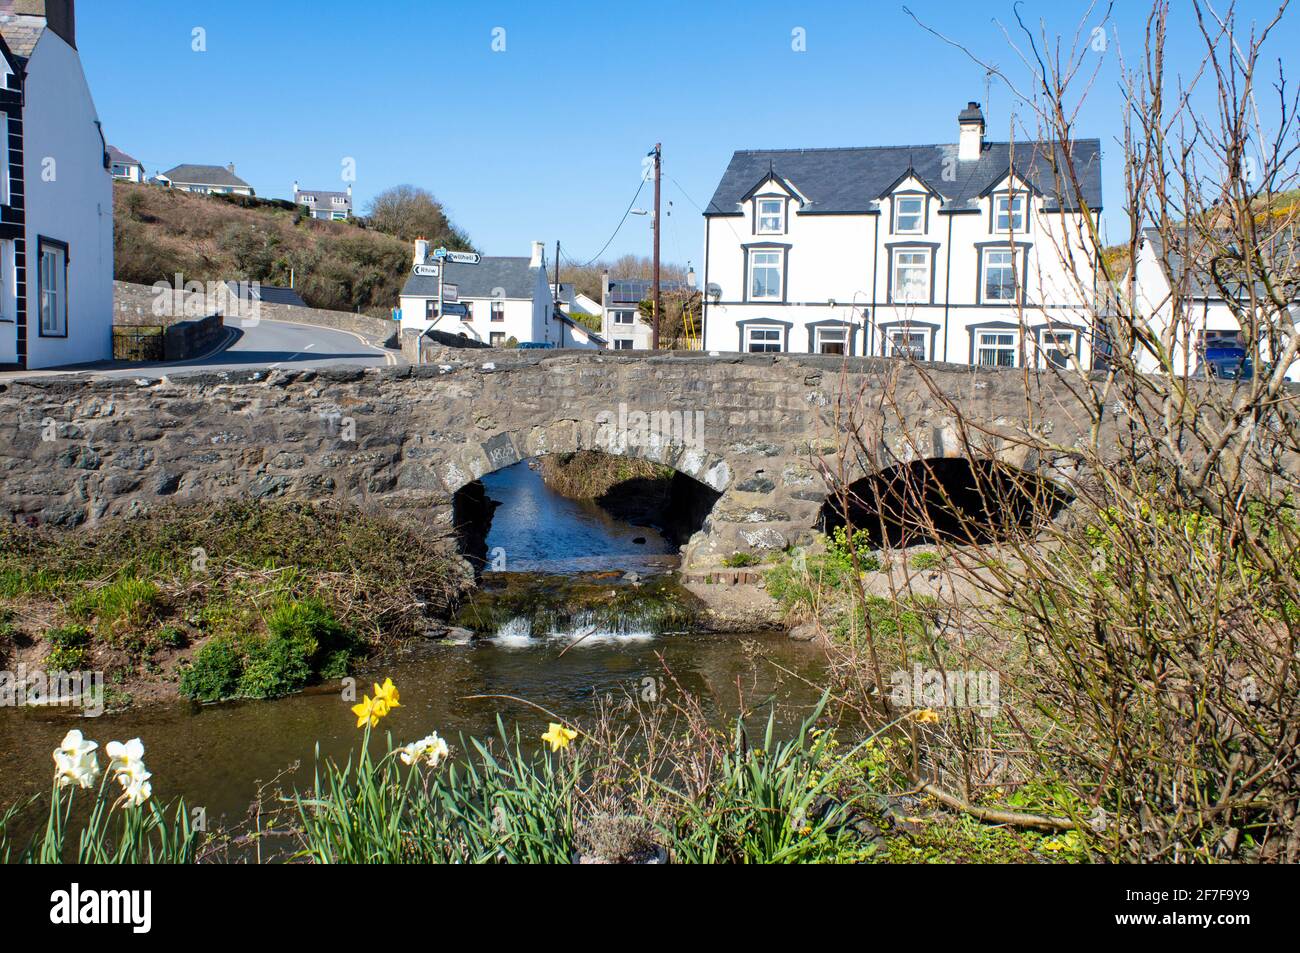 Aberdaron village, Wales. Landscape with small stone bridge over a stream.  Charming small seaside resort. Stock Photo